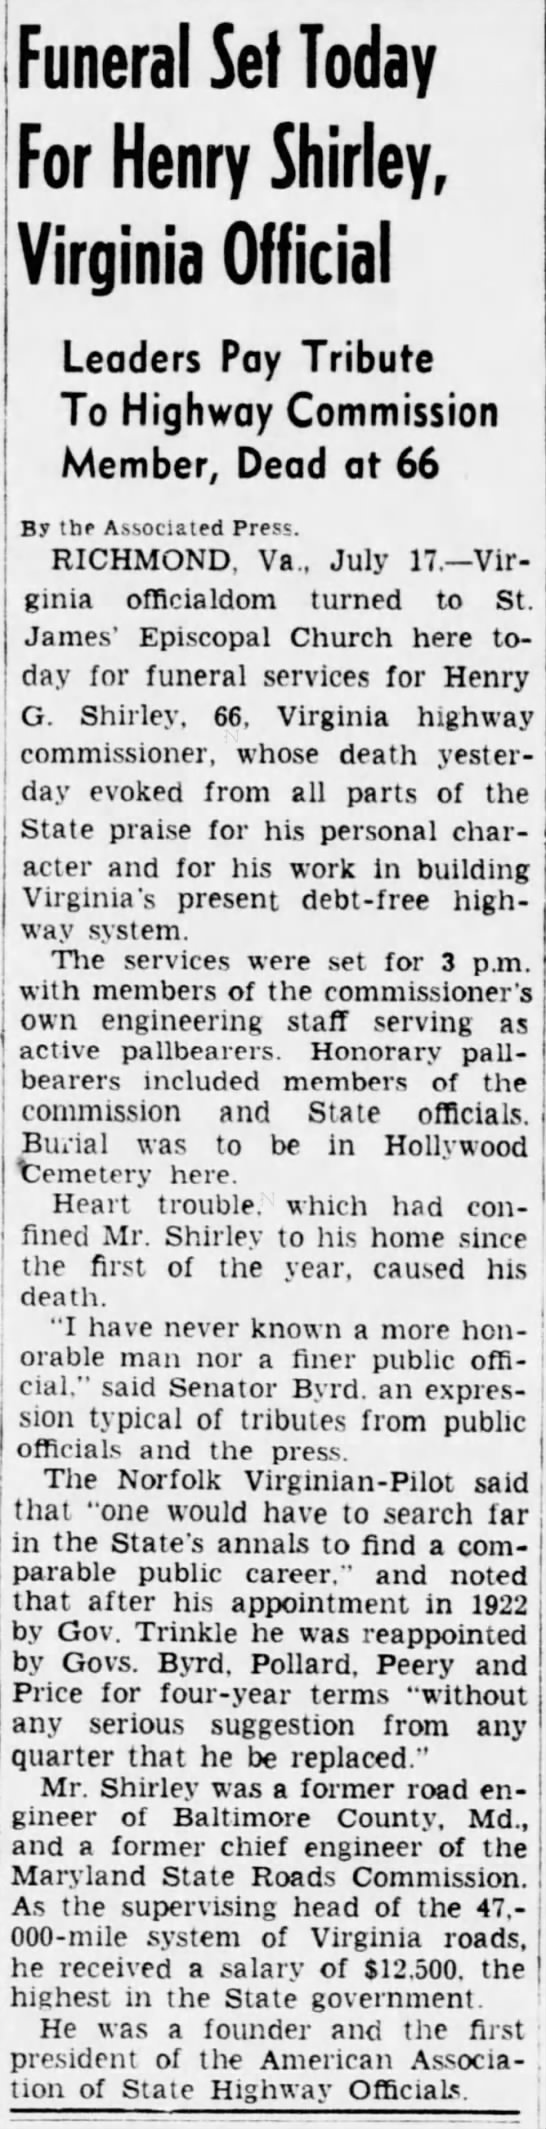 Funeral Set Today For Henry Shirley, Virginia Official; 17 Jul 1941; Evening Star; A-12 - 